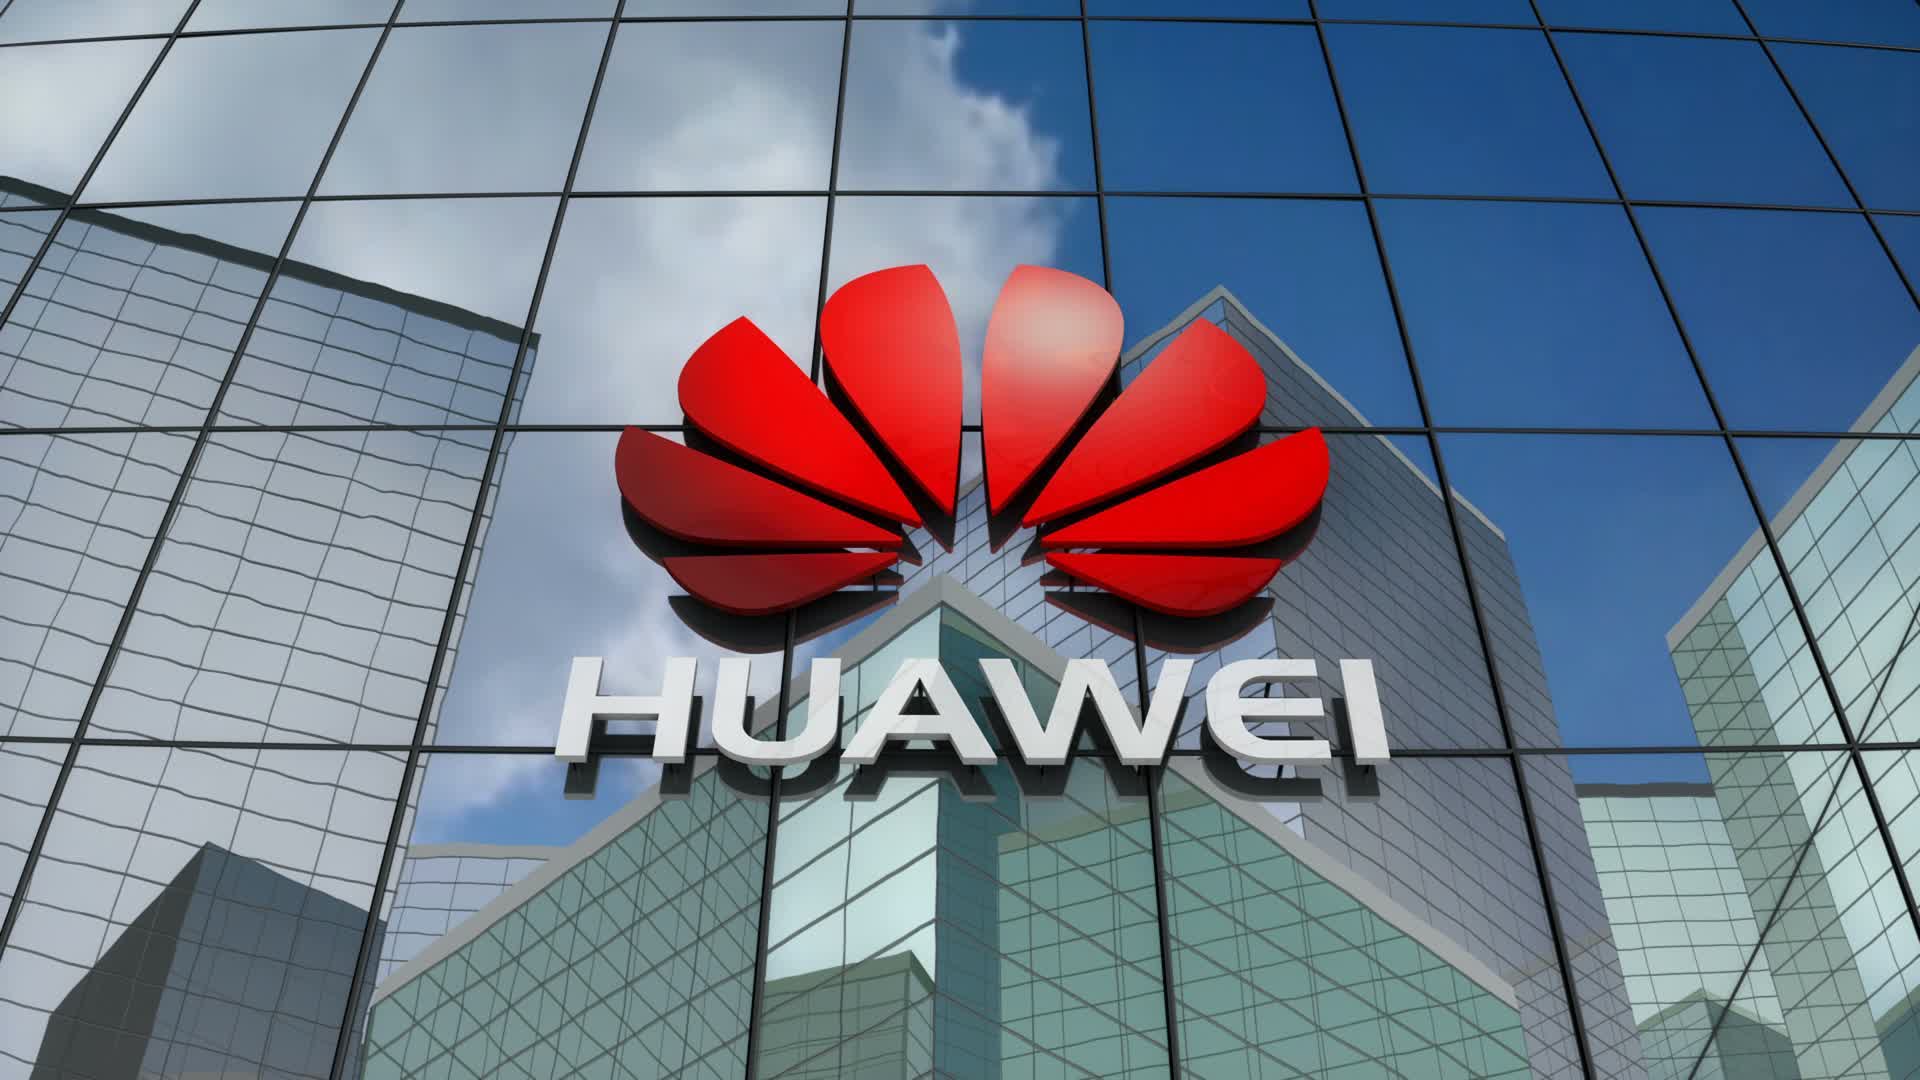 The EU could ban Huawei from its 5G networks